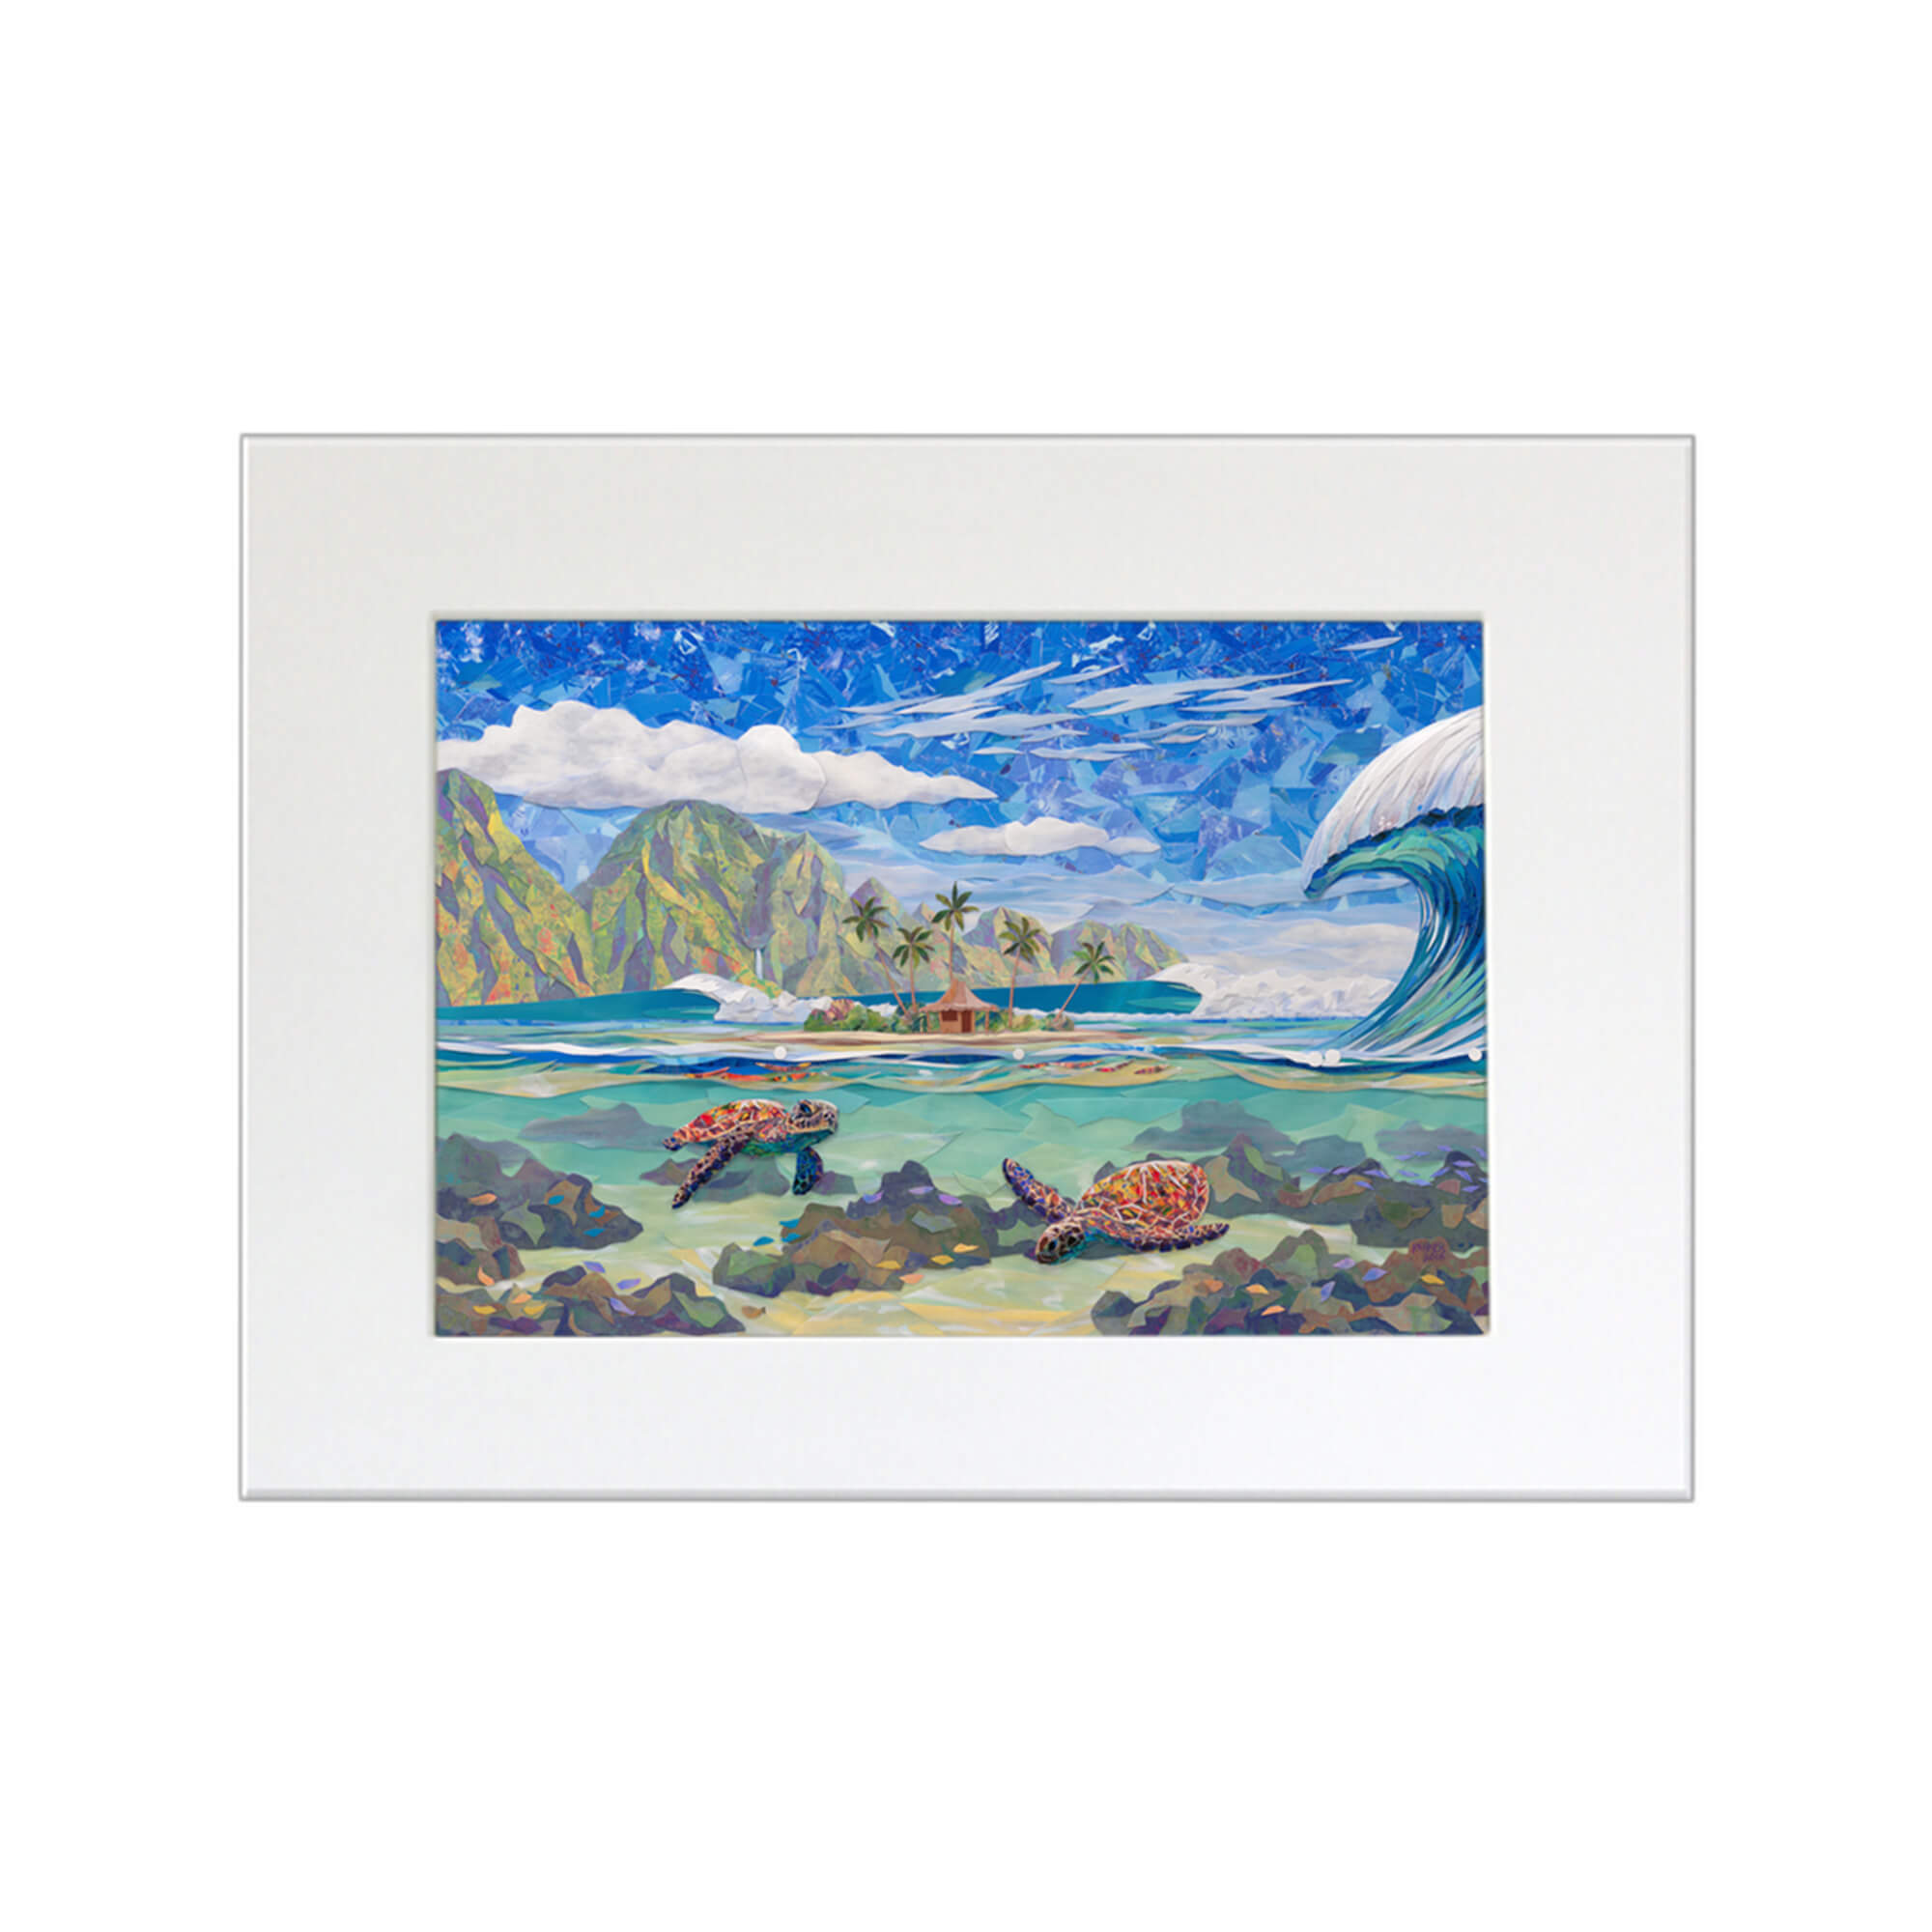 A matted art print featuring a collage of a tranquil seascape with two swimming sea turtles a hut on an island, a huge crashing wave, and a mountain background by Hawaii artist Patrick Parker